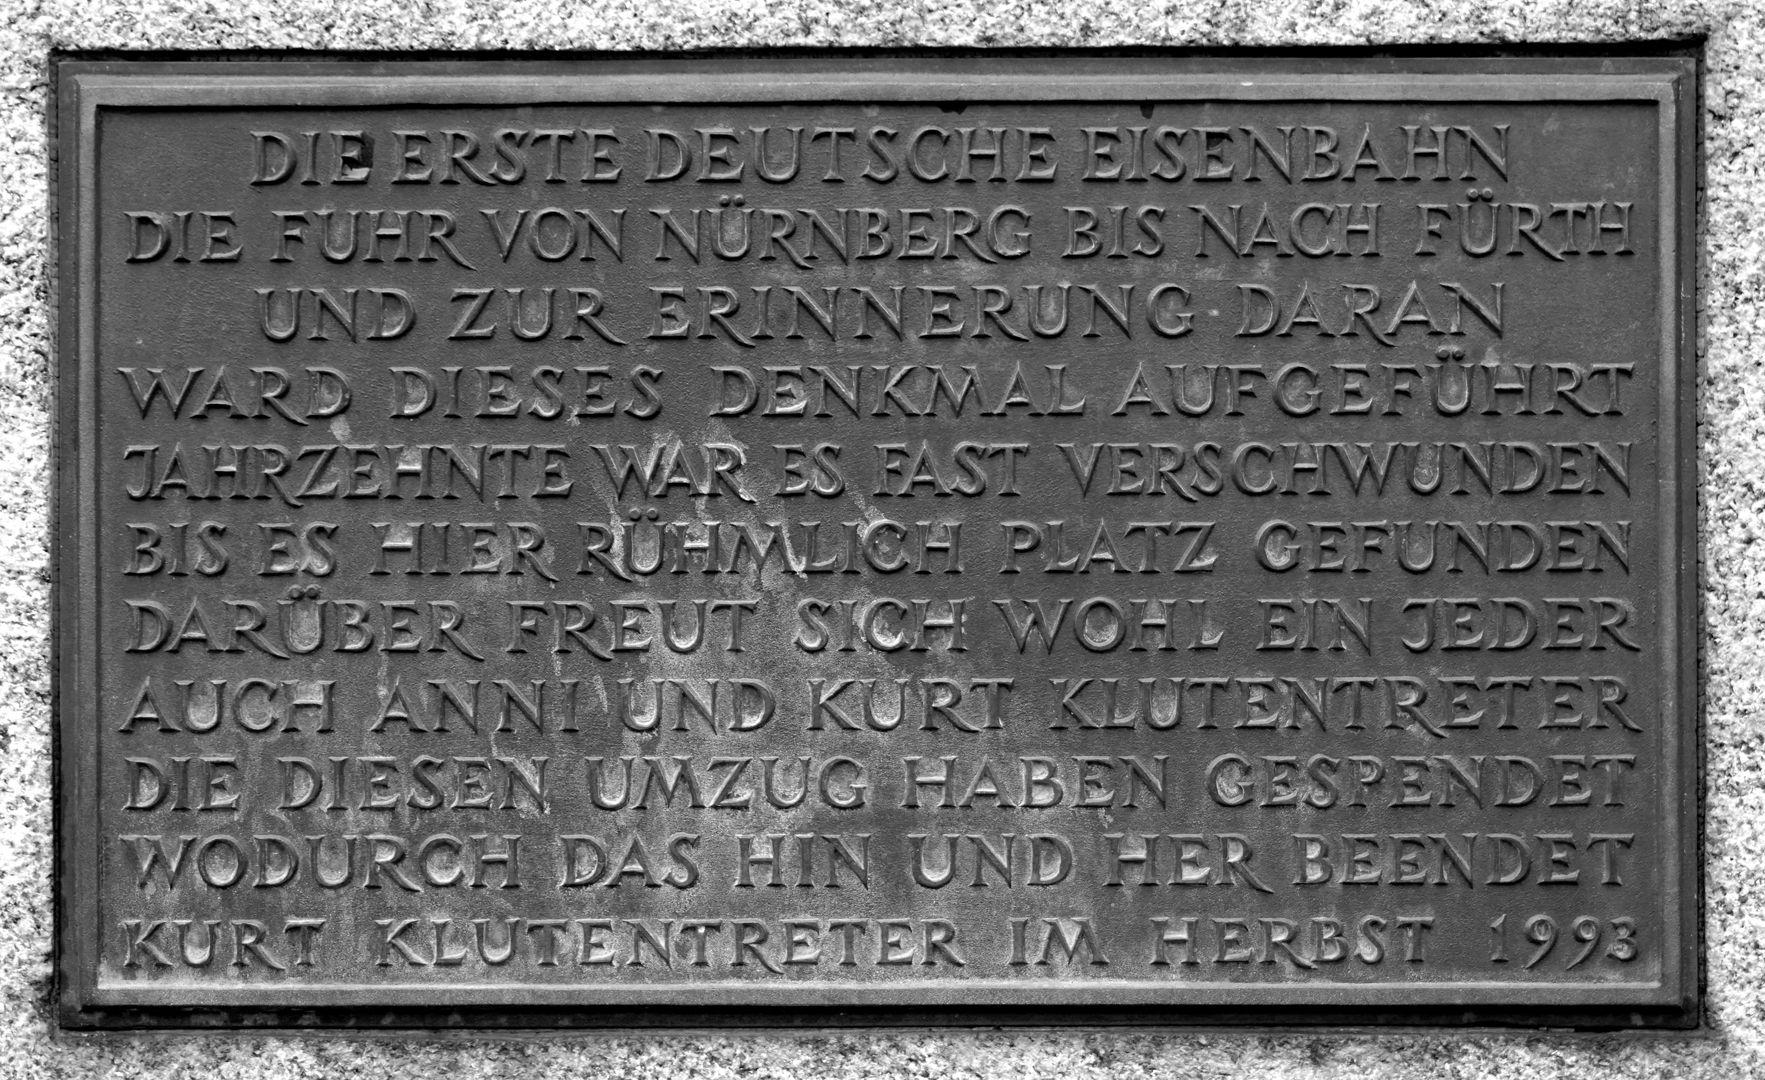 Memorial to King Ludwig´s Railway (Ludwigseisenbahn) On the monument side of the Pultstein, inscription by Anni and Kurt Klutentreter